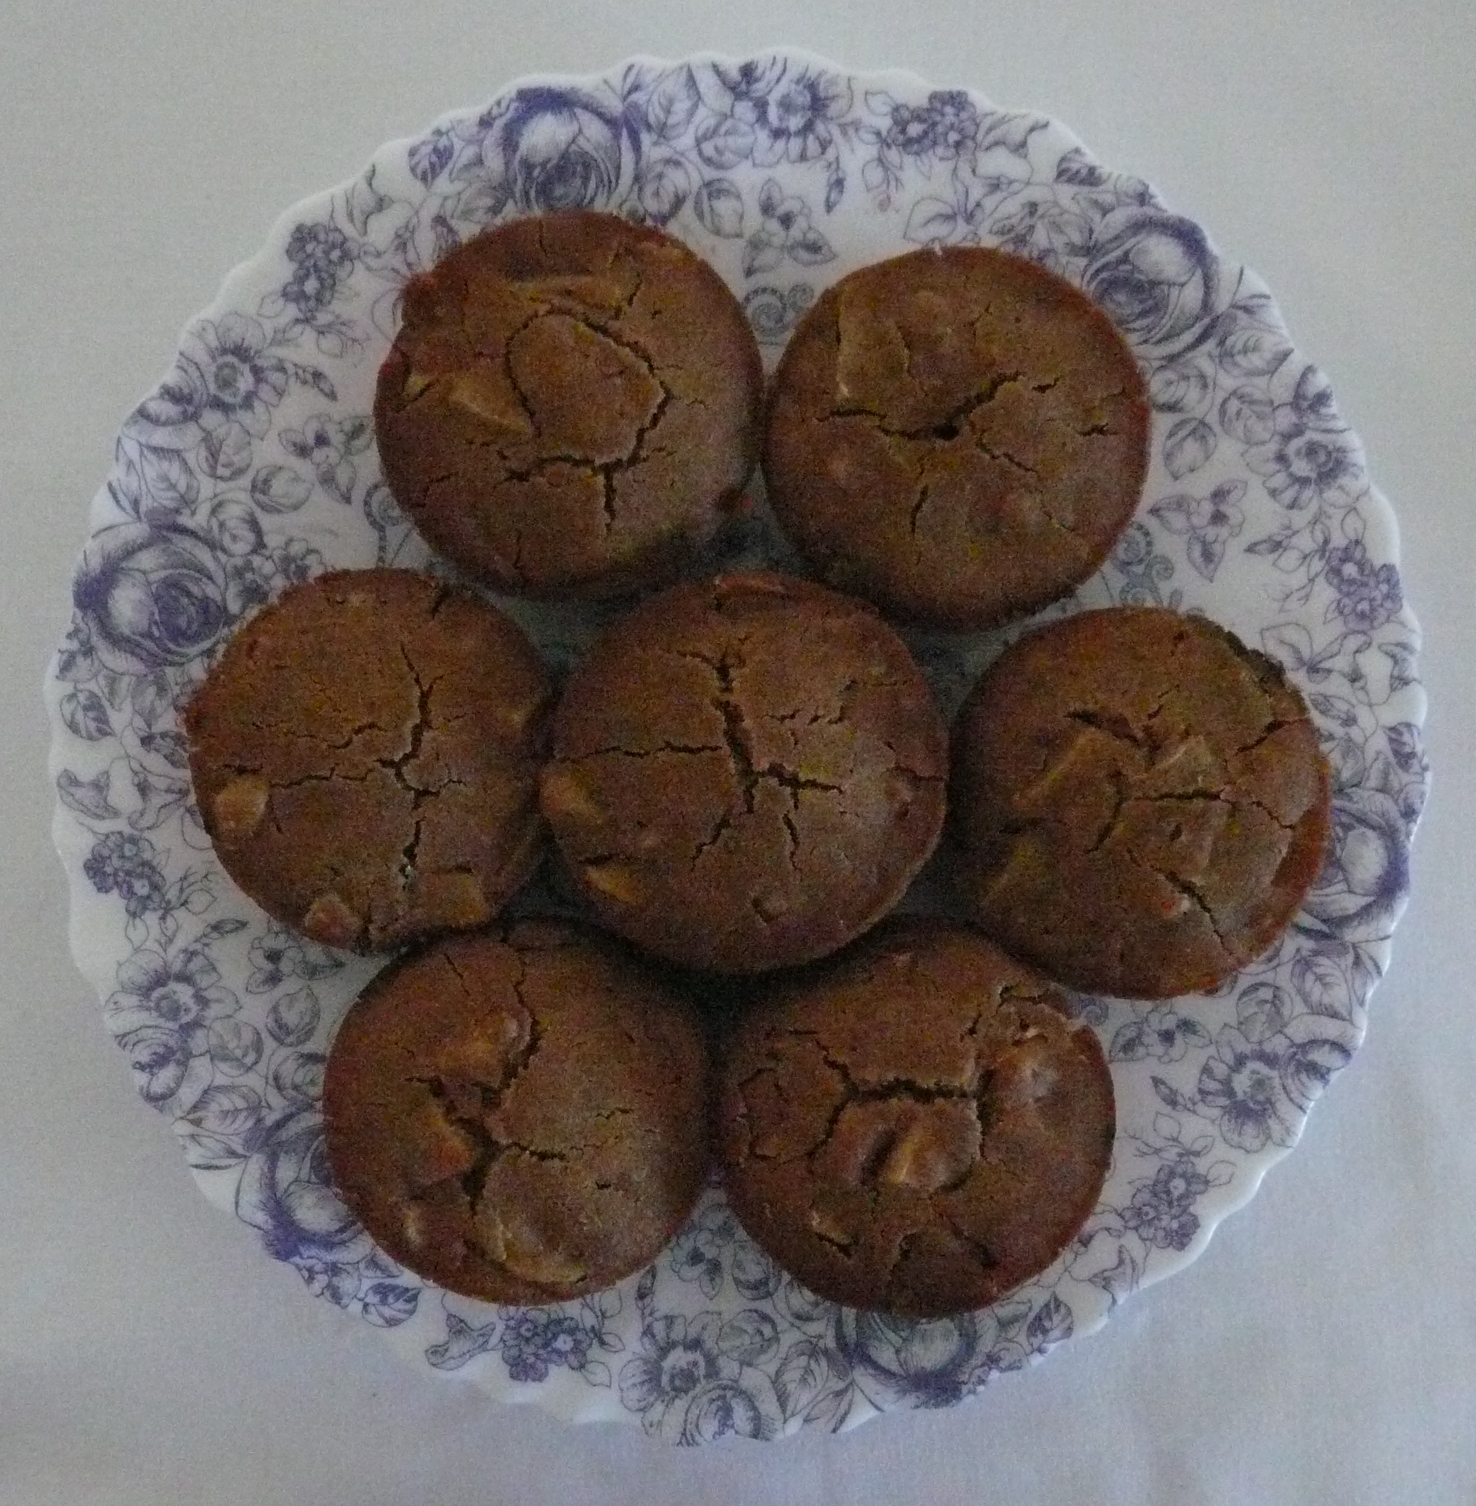 Apple and mango muffins in a plate